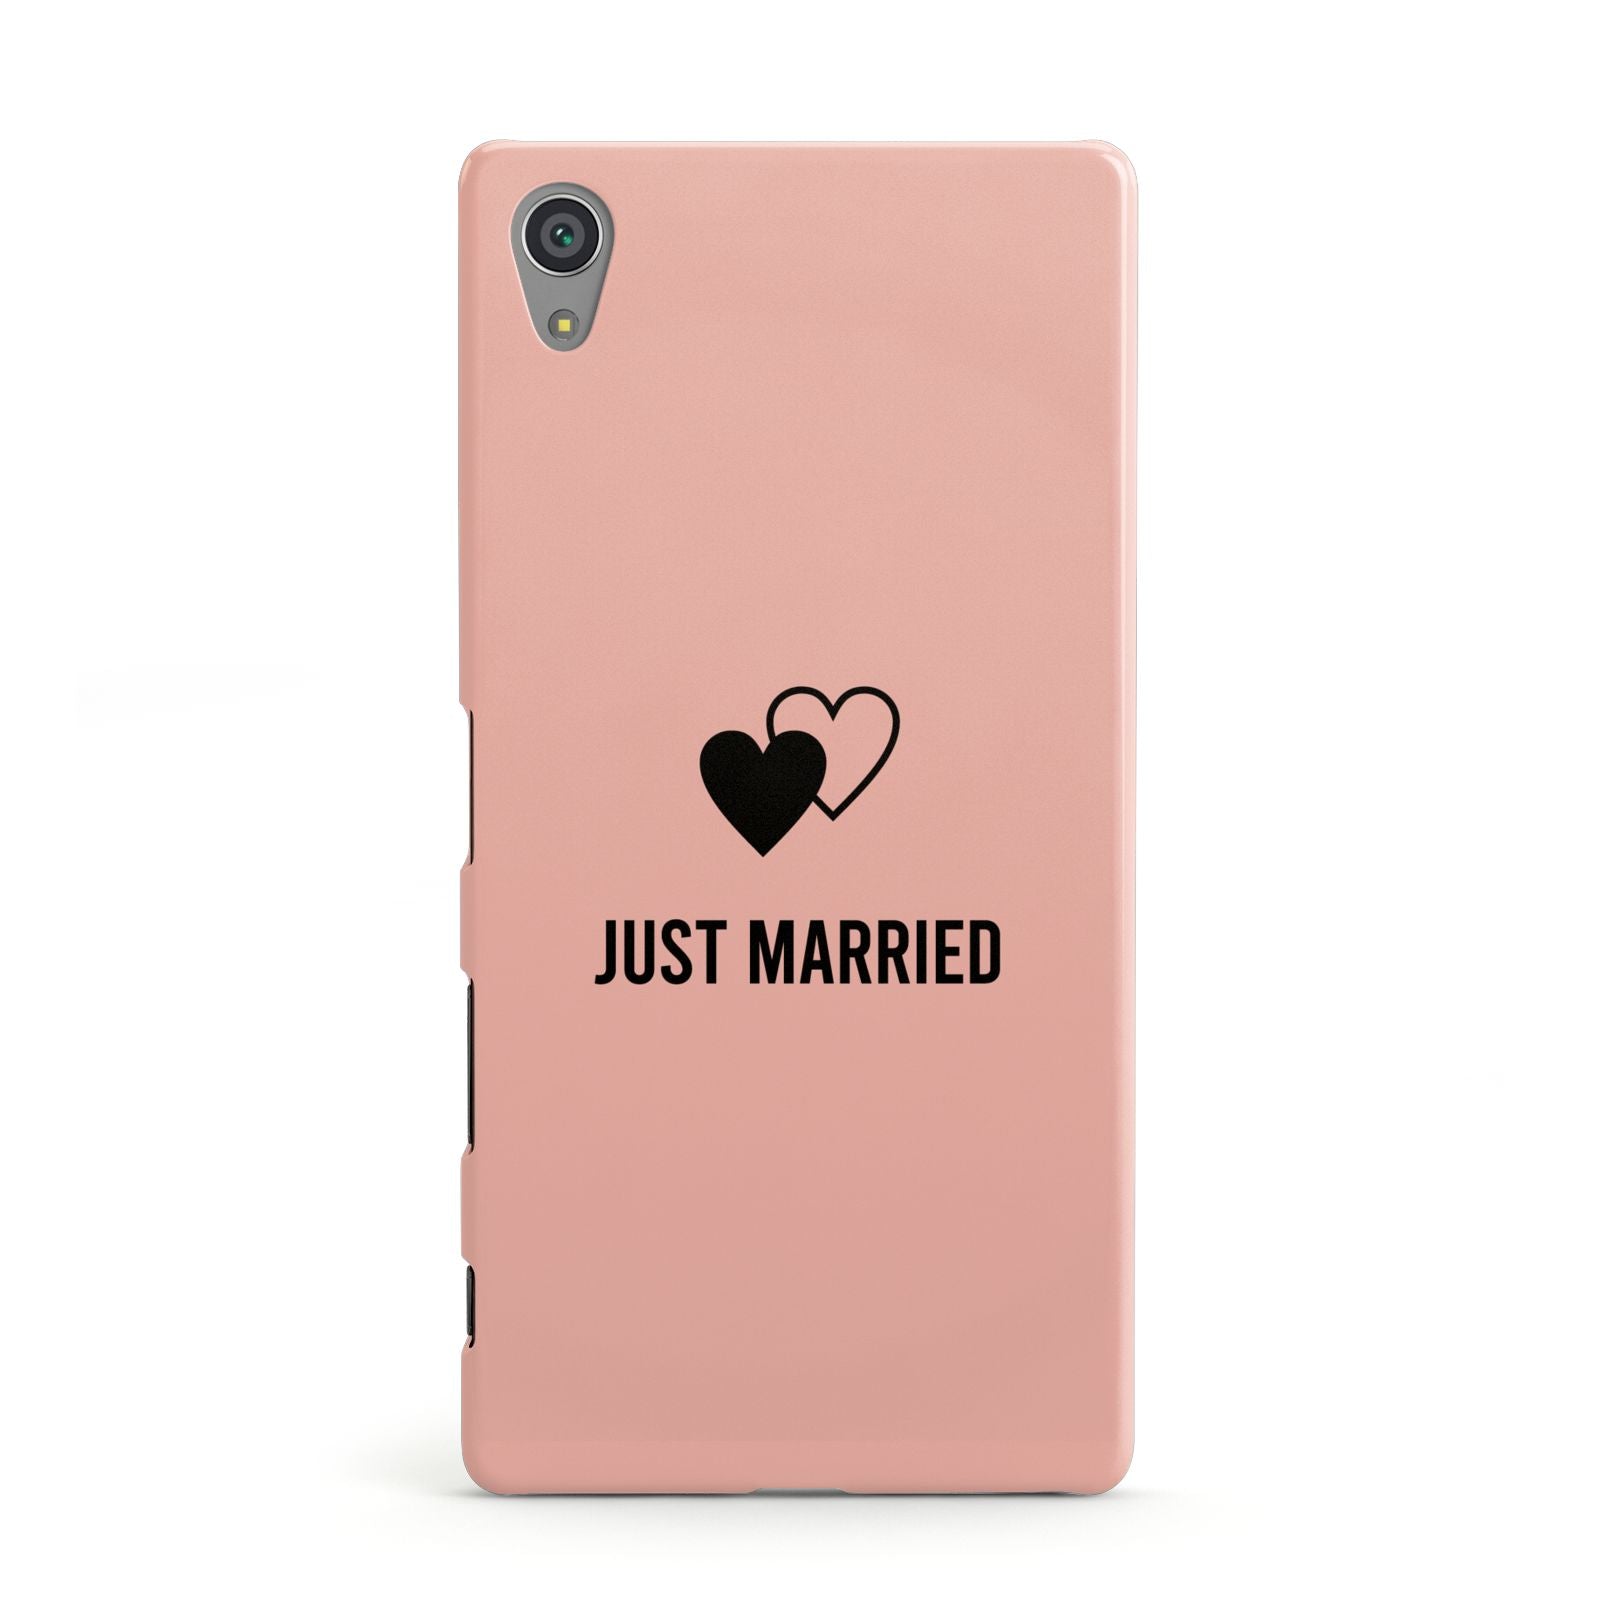 Just Married Sony Xperia Case